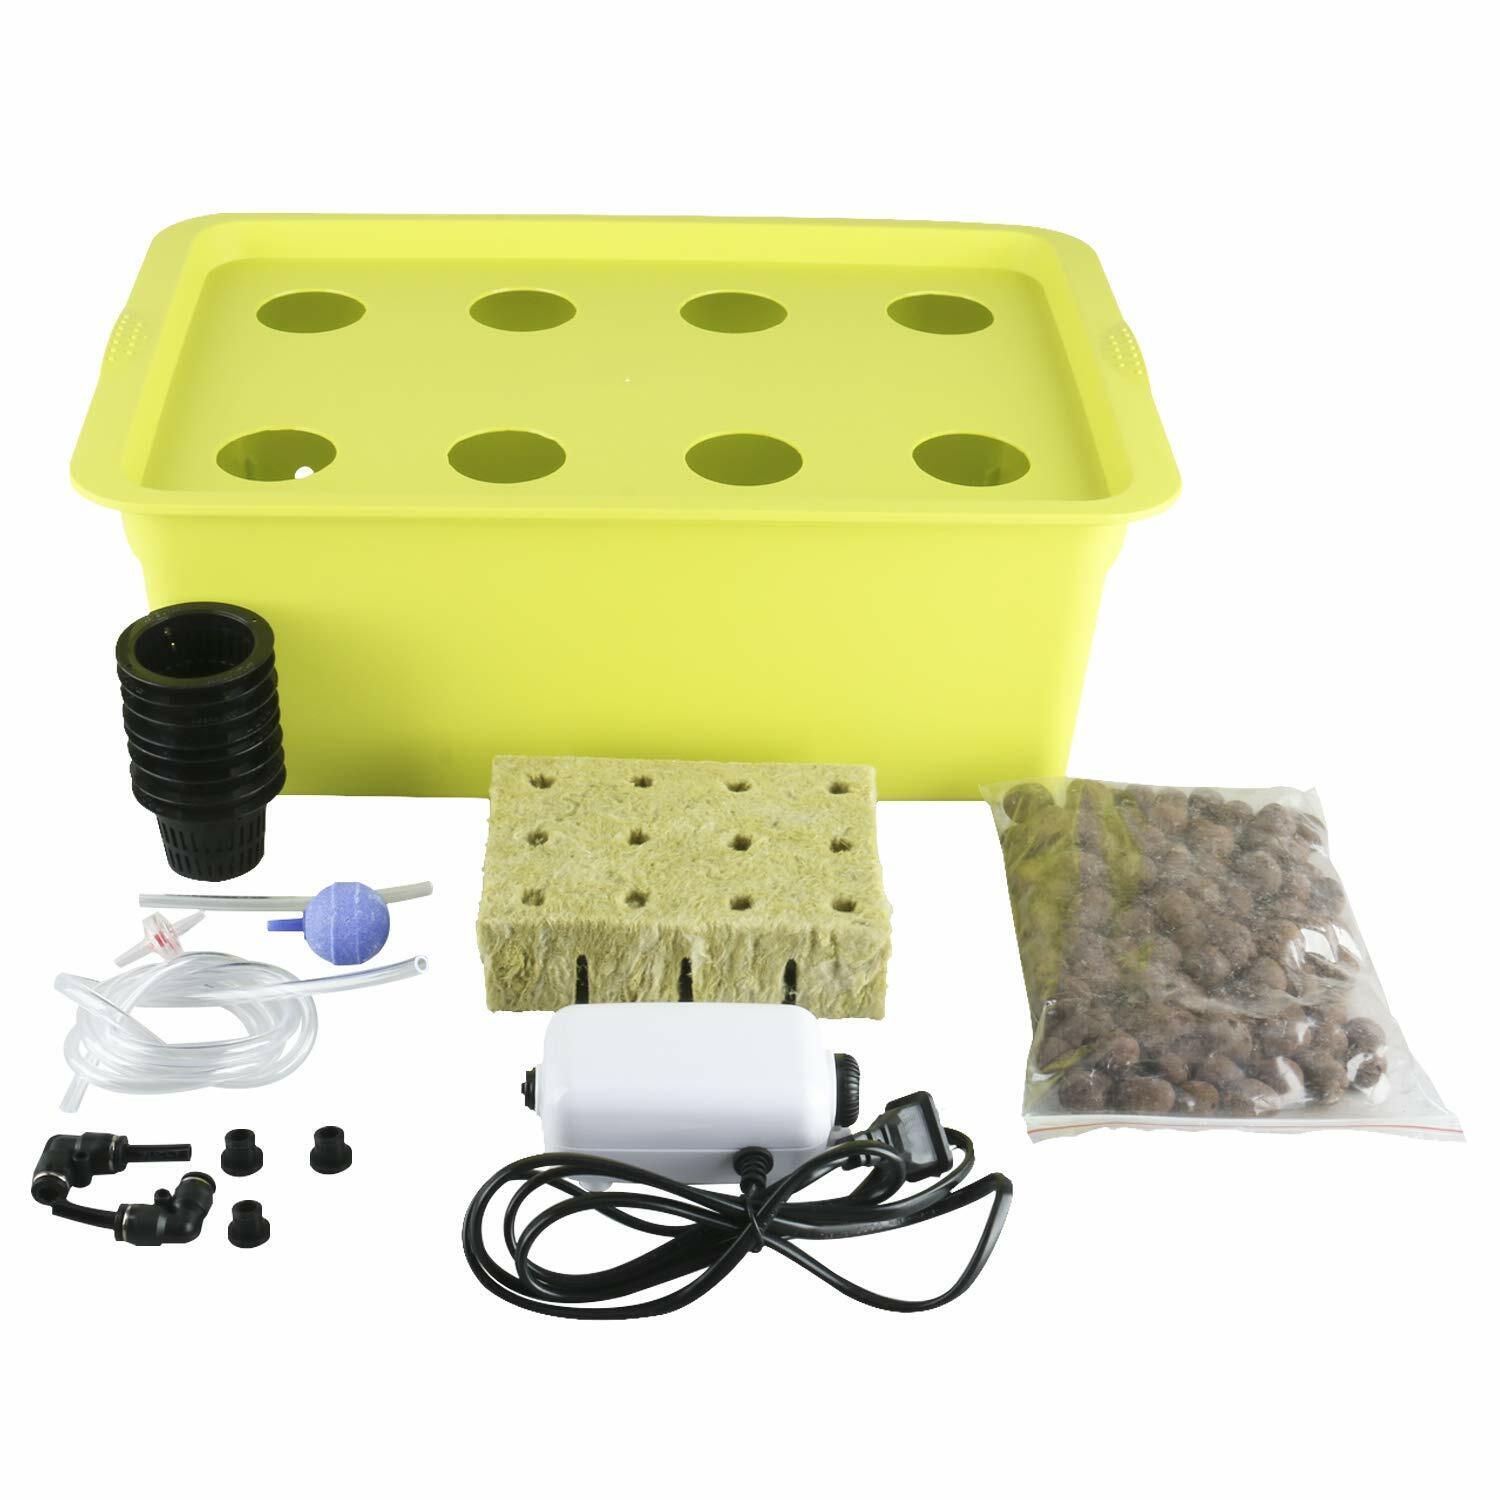 DWC Deep Water Culture Hydroponic Grow System Kit, 8 Plant Sites (Holes) Bucket